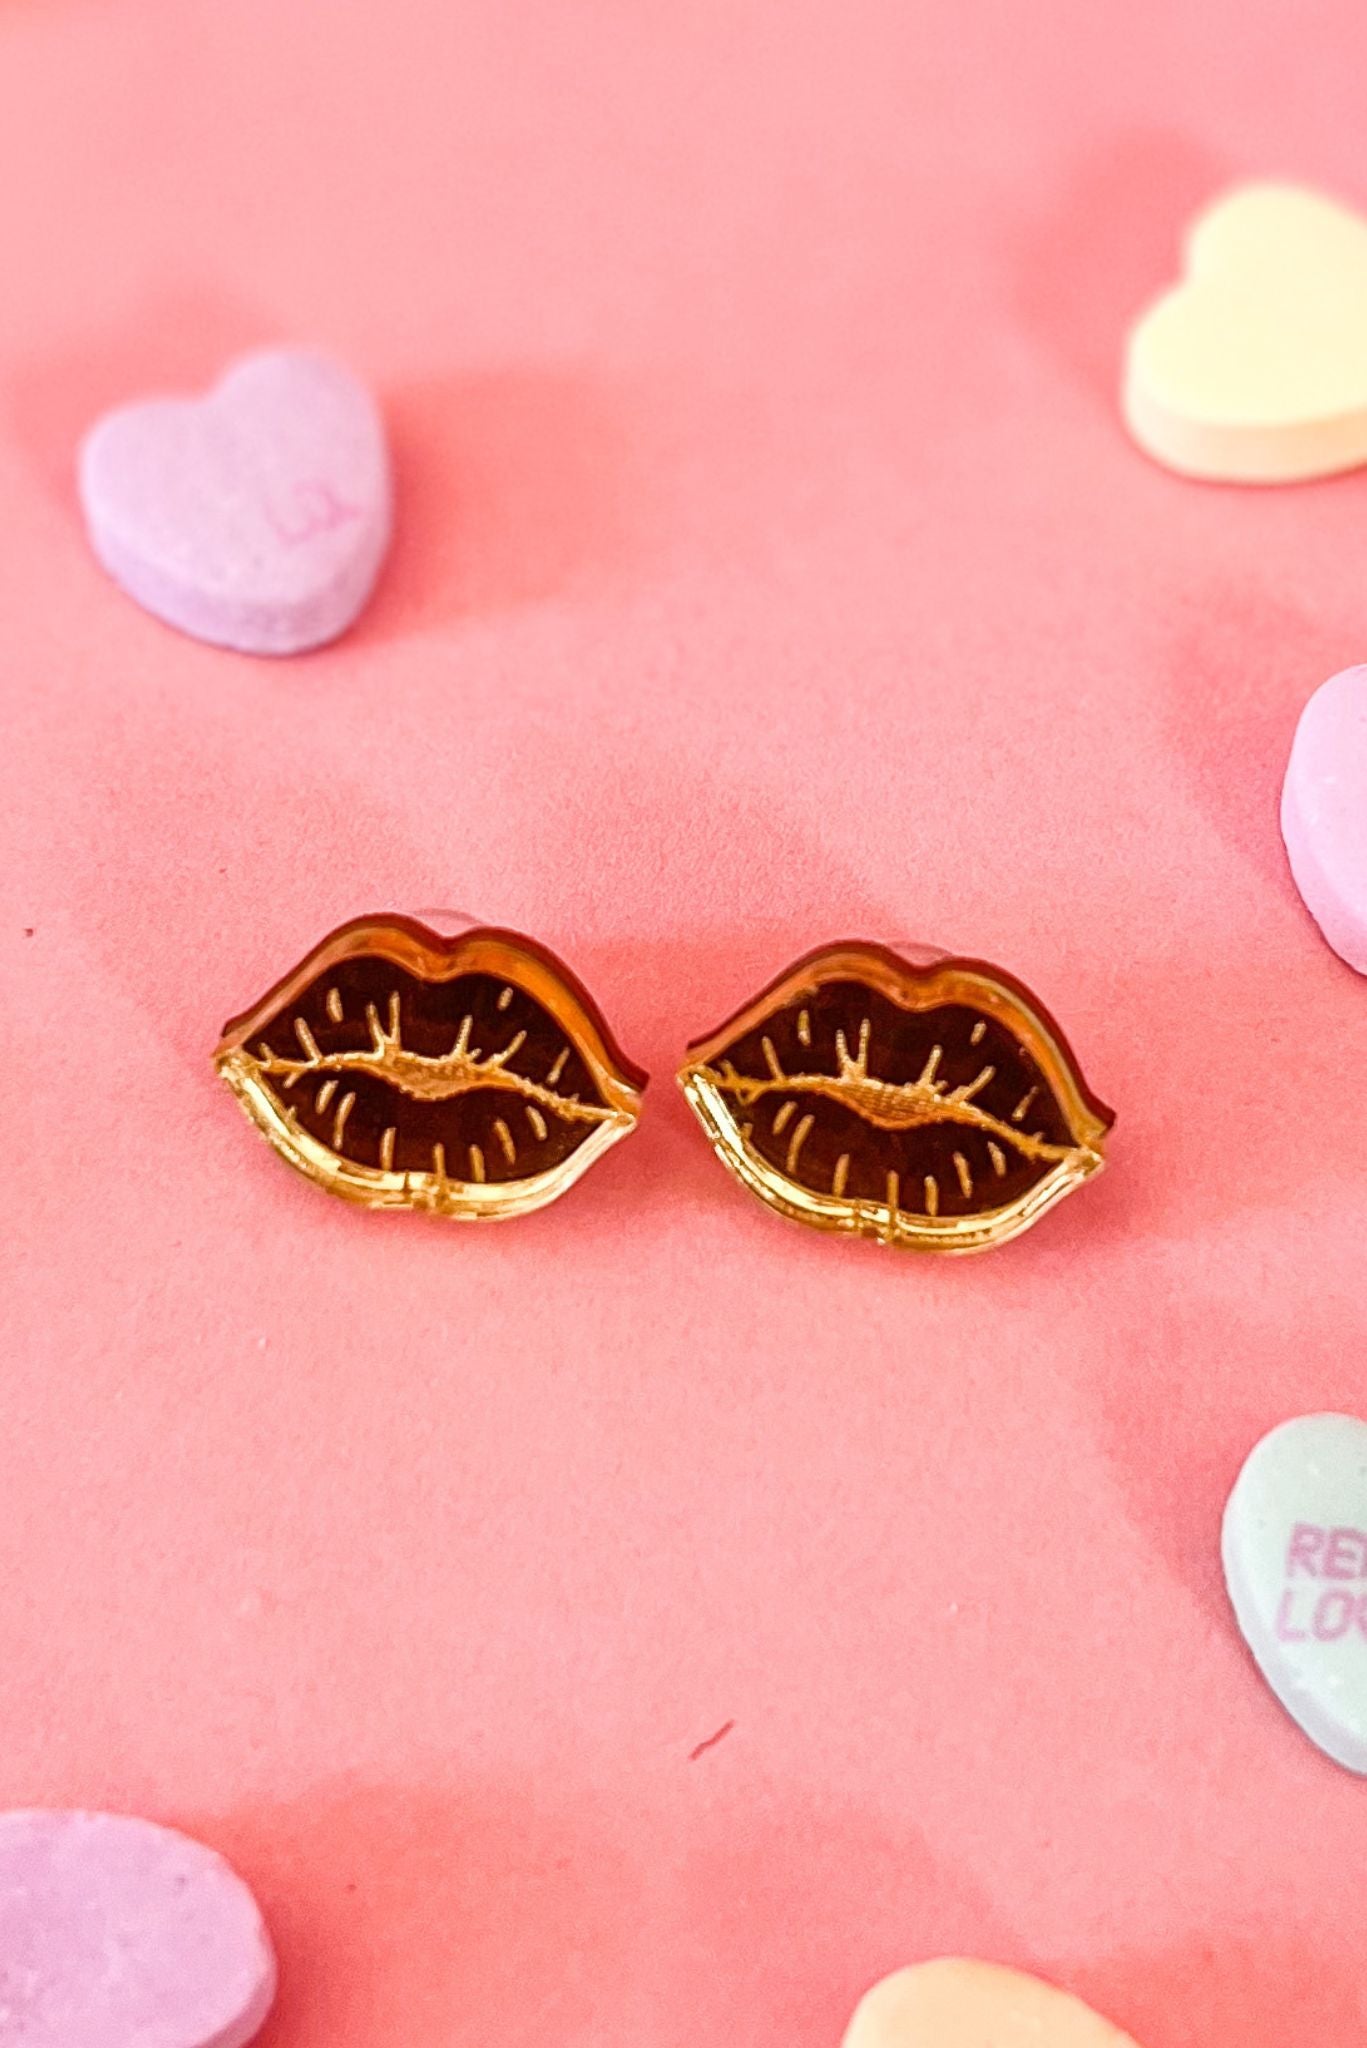 Load image into Gallery viewer, Gold Acrylic Lips Stud Earrings
